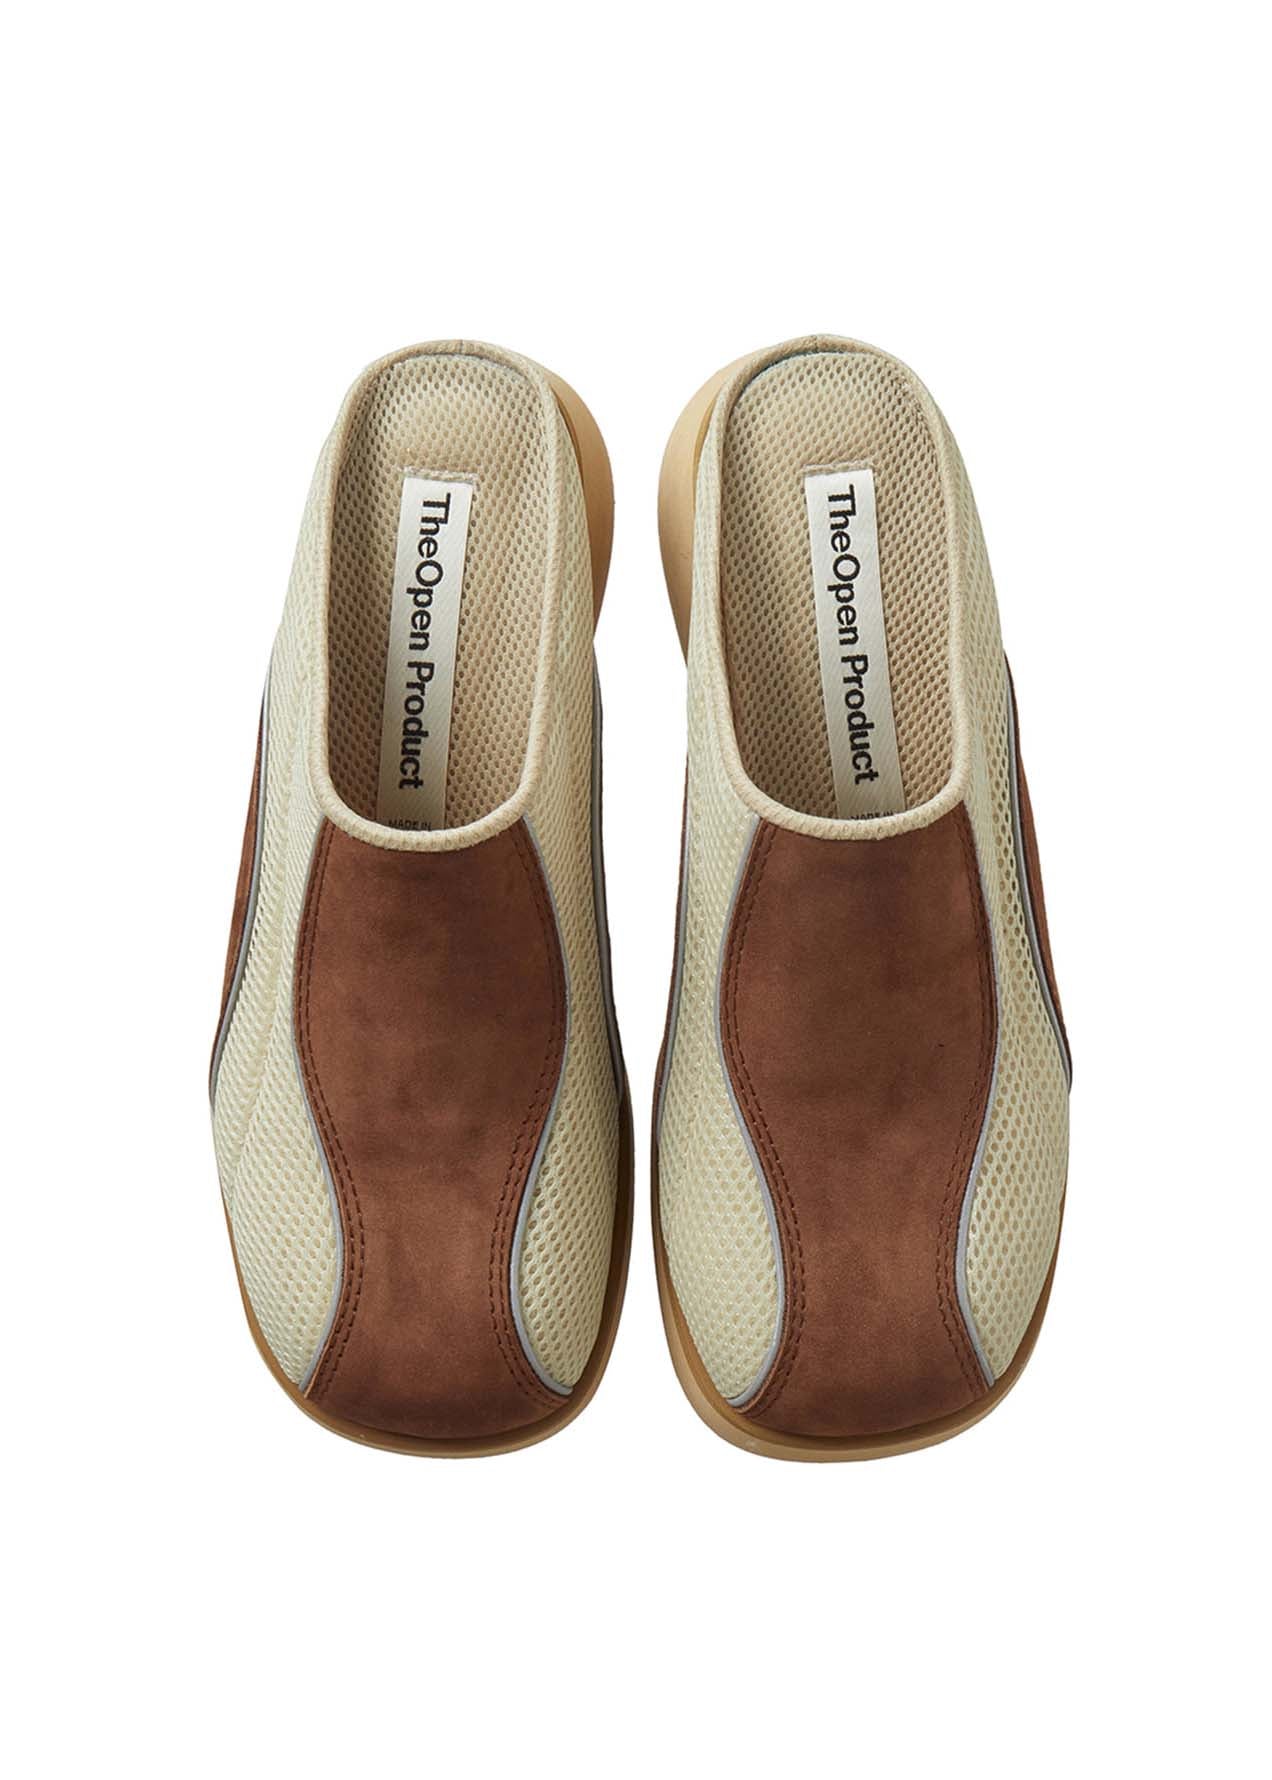 Beige & Brown Paneled Slippers - 157Moments